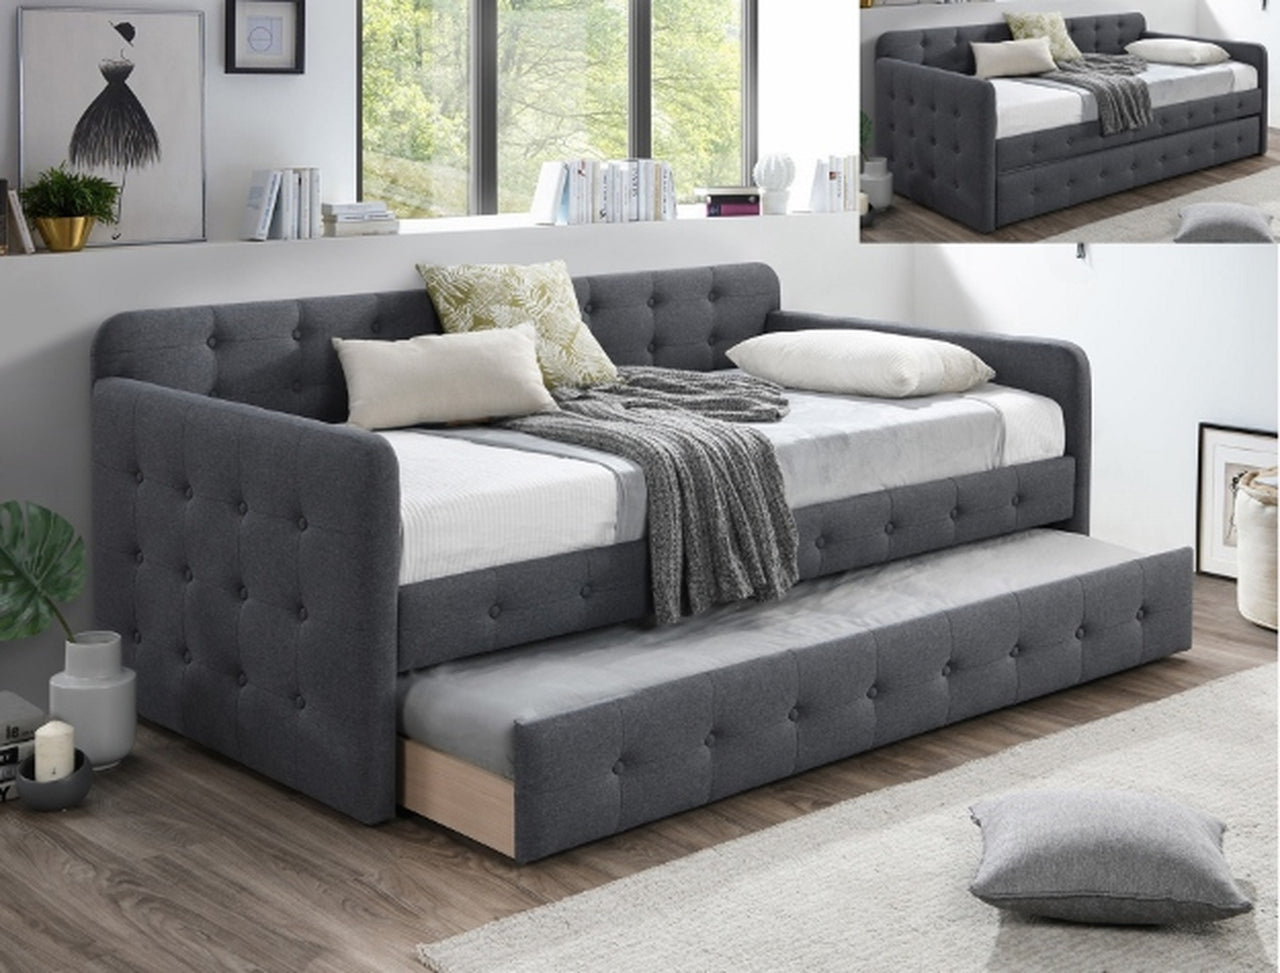 5327 GY-SET HAVEN DAYBED GRIS. MUY PRONTO.